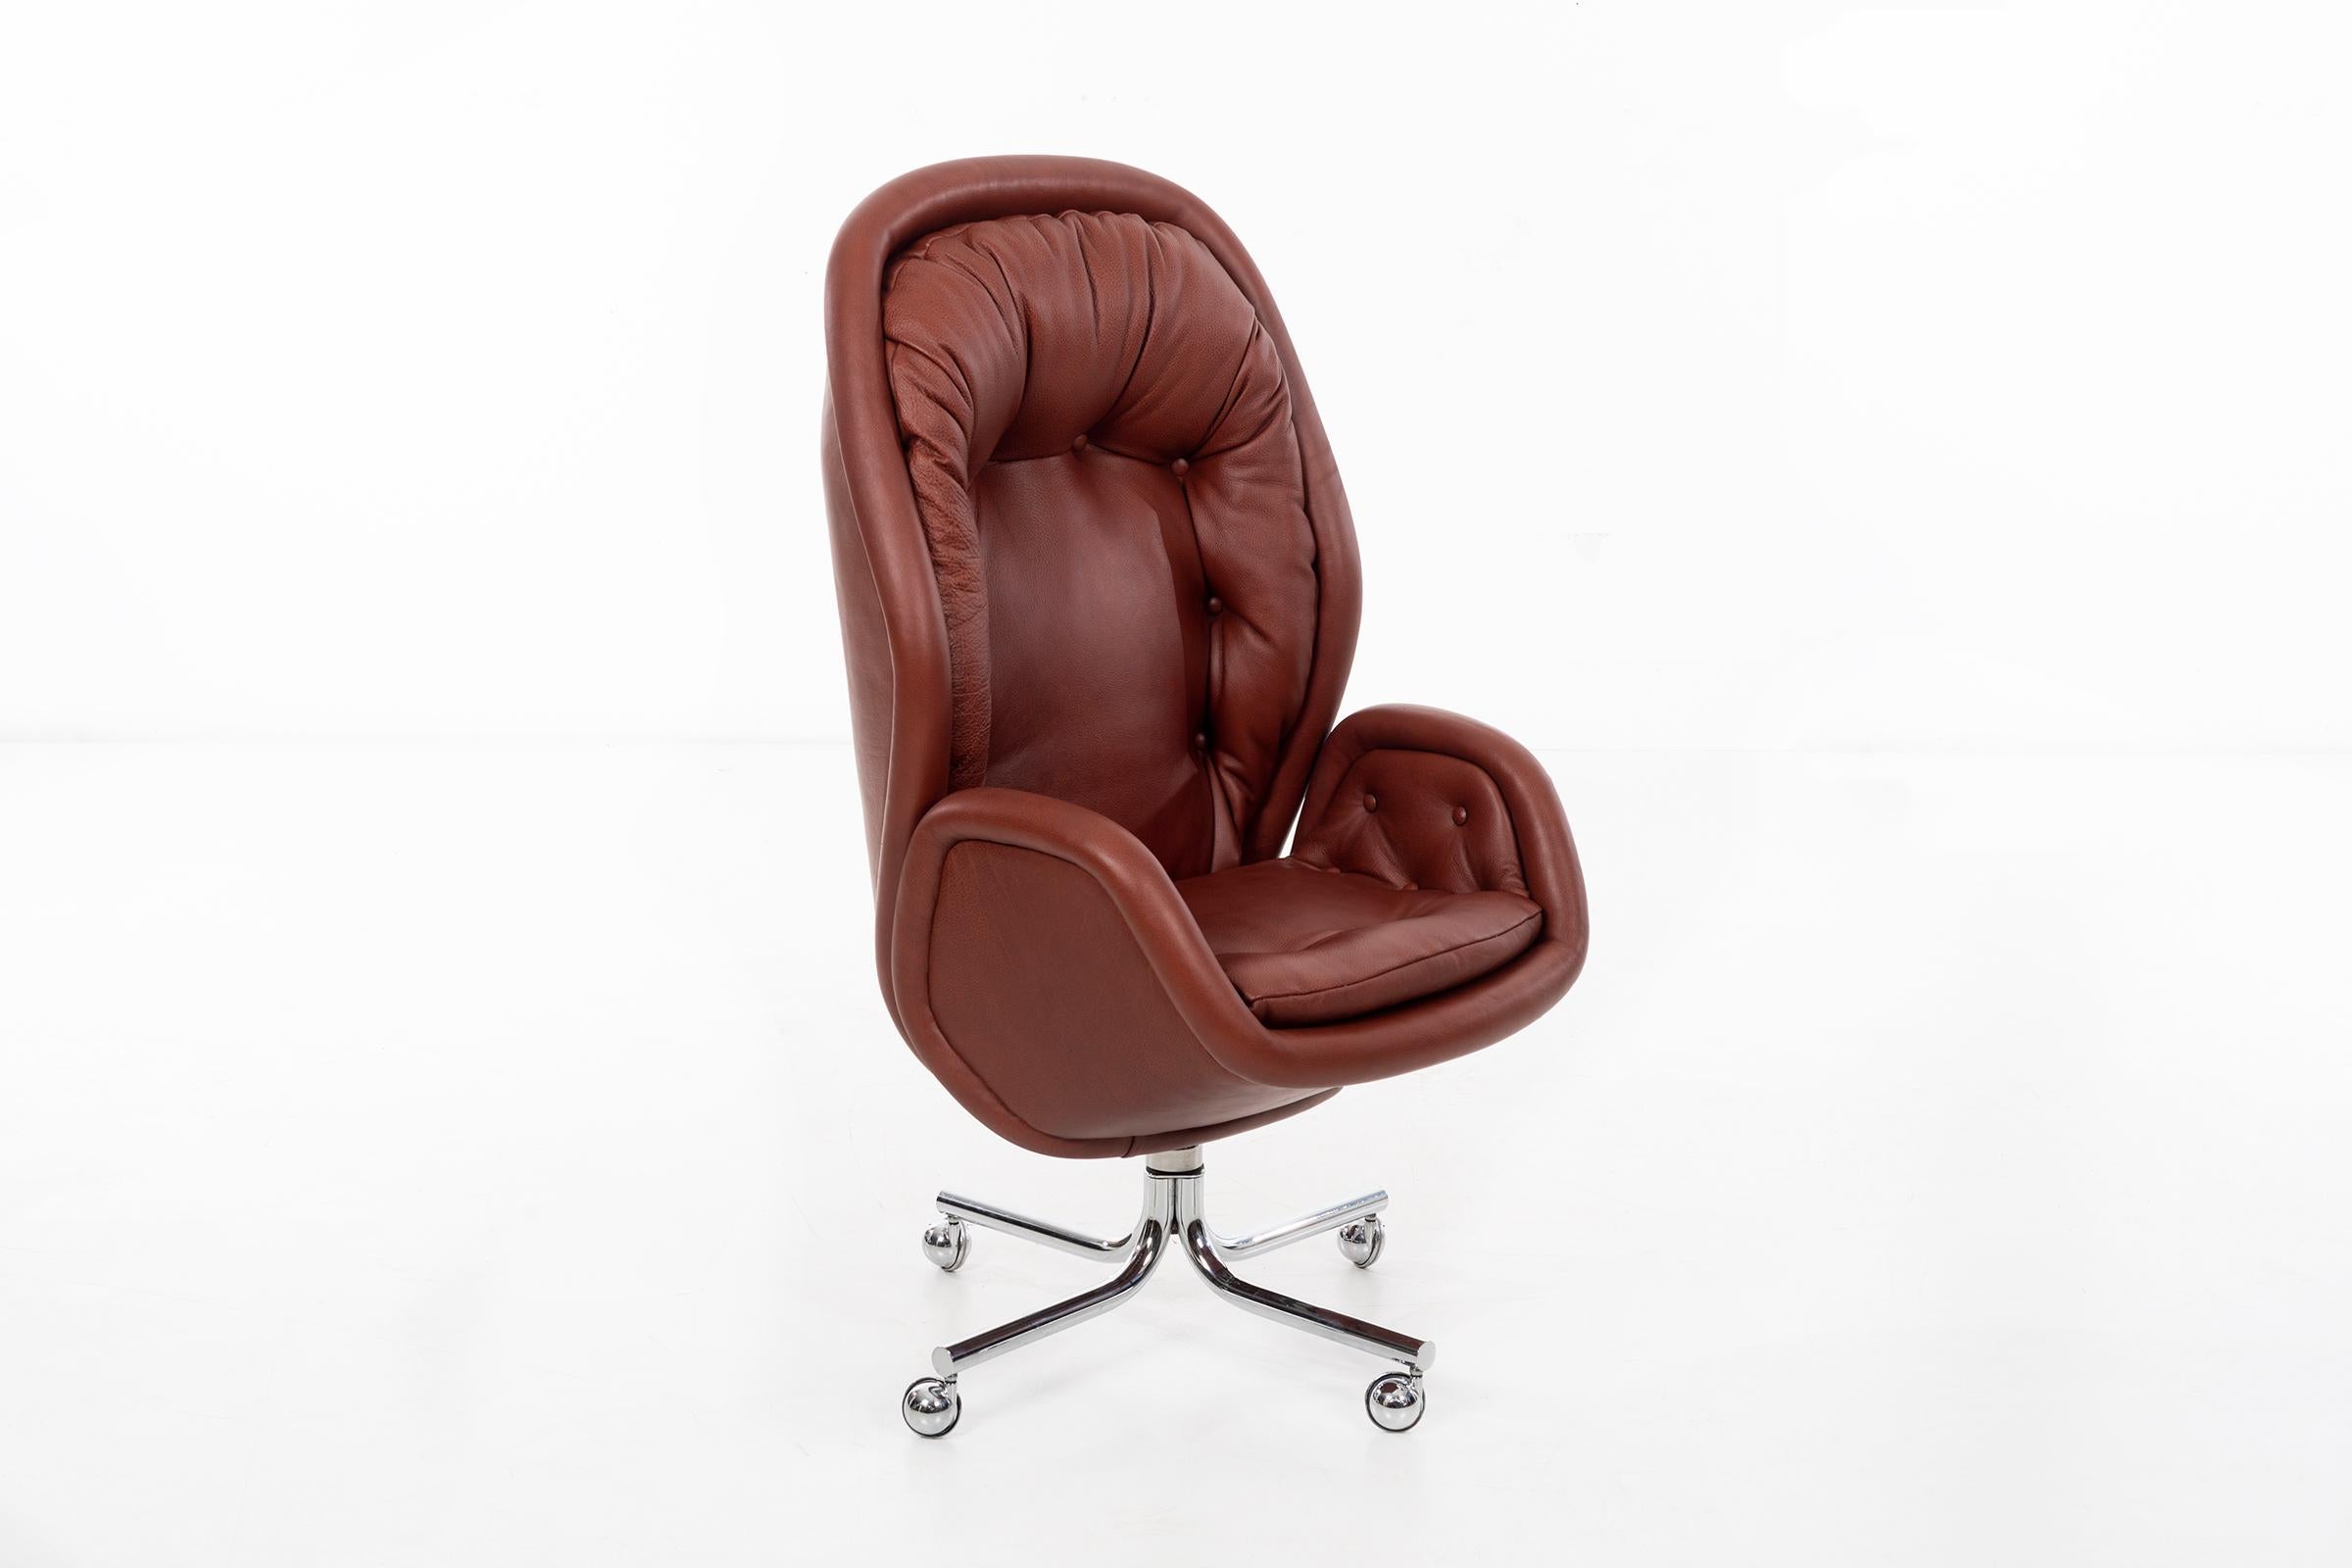 Sculptural executive desk chair. Newly upholstered with foam in Spinneybeck leather, on chrome-plated base. Chair features adjustable height, swivels, and reclines.